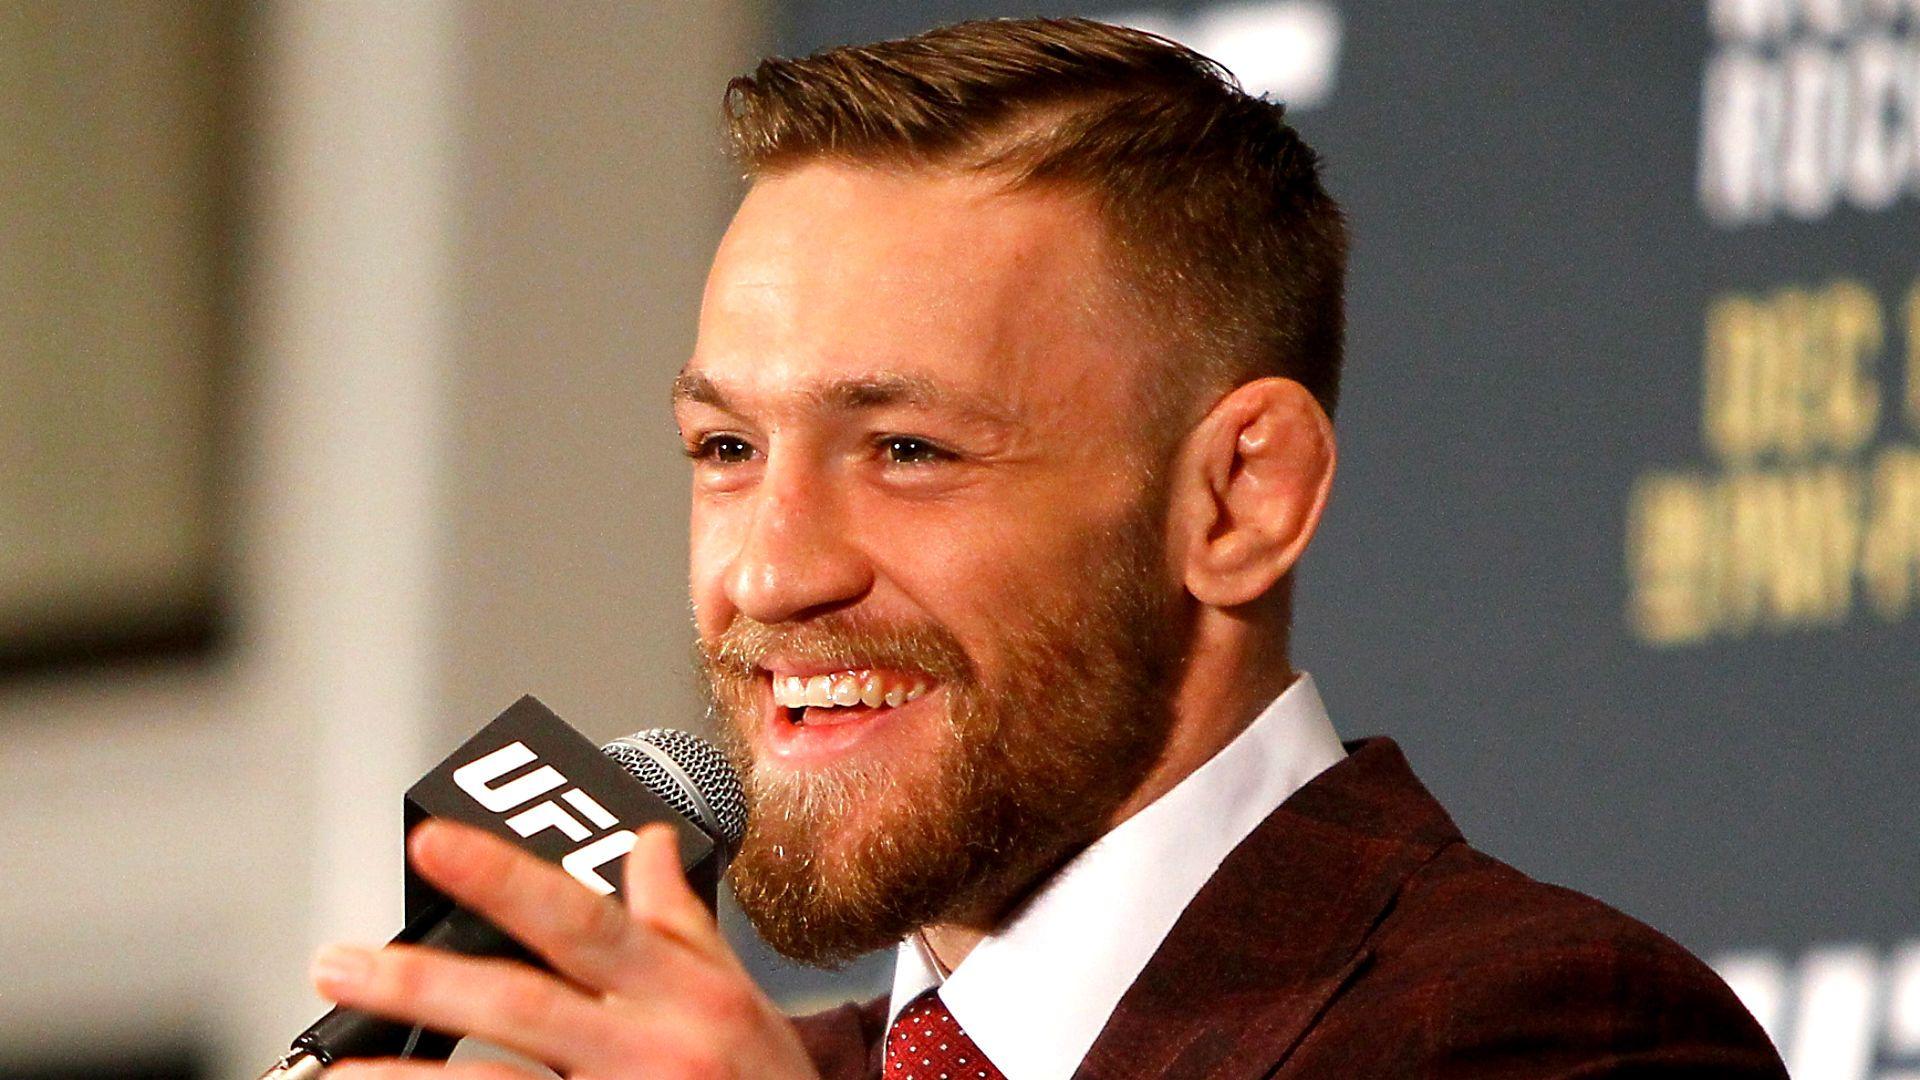 Conor McGregor eyes acting career after he wins a few more belts